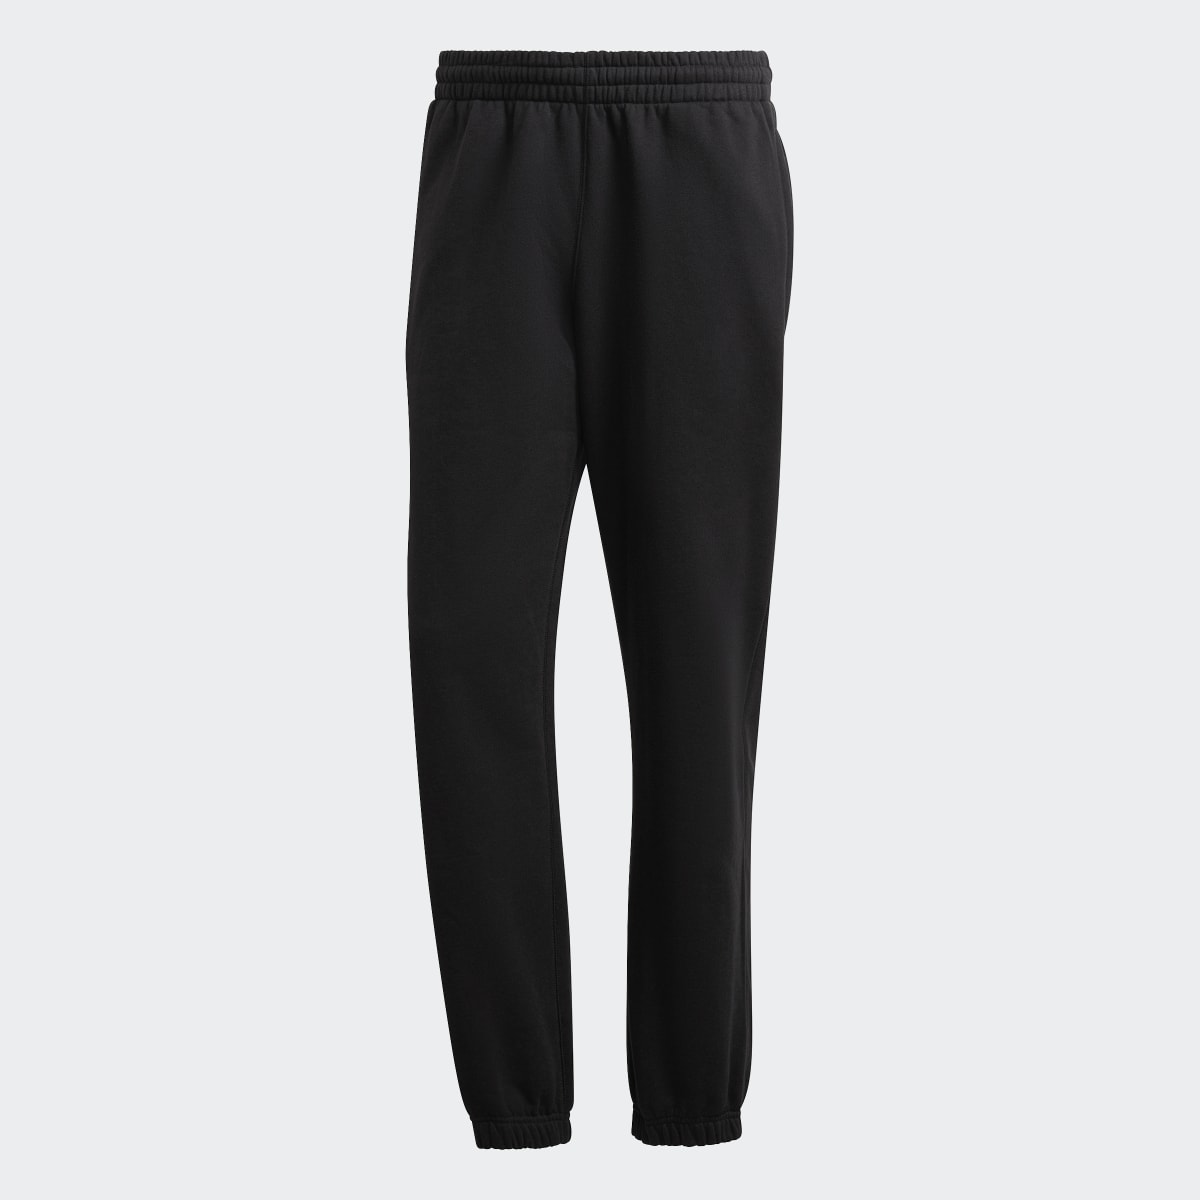 Adidas Adicolor Contempo French Terry Sweat Pants. 5